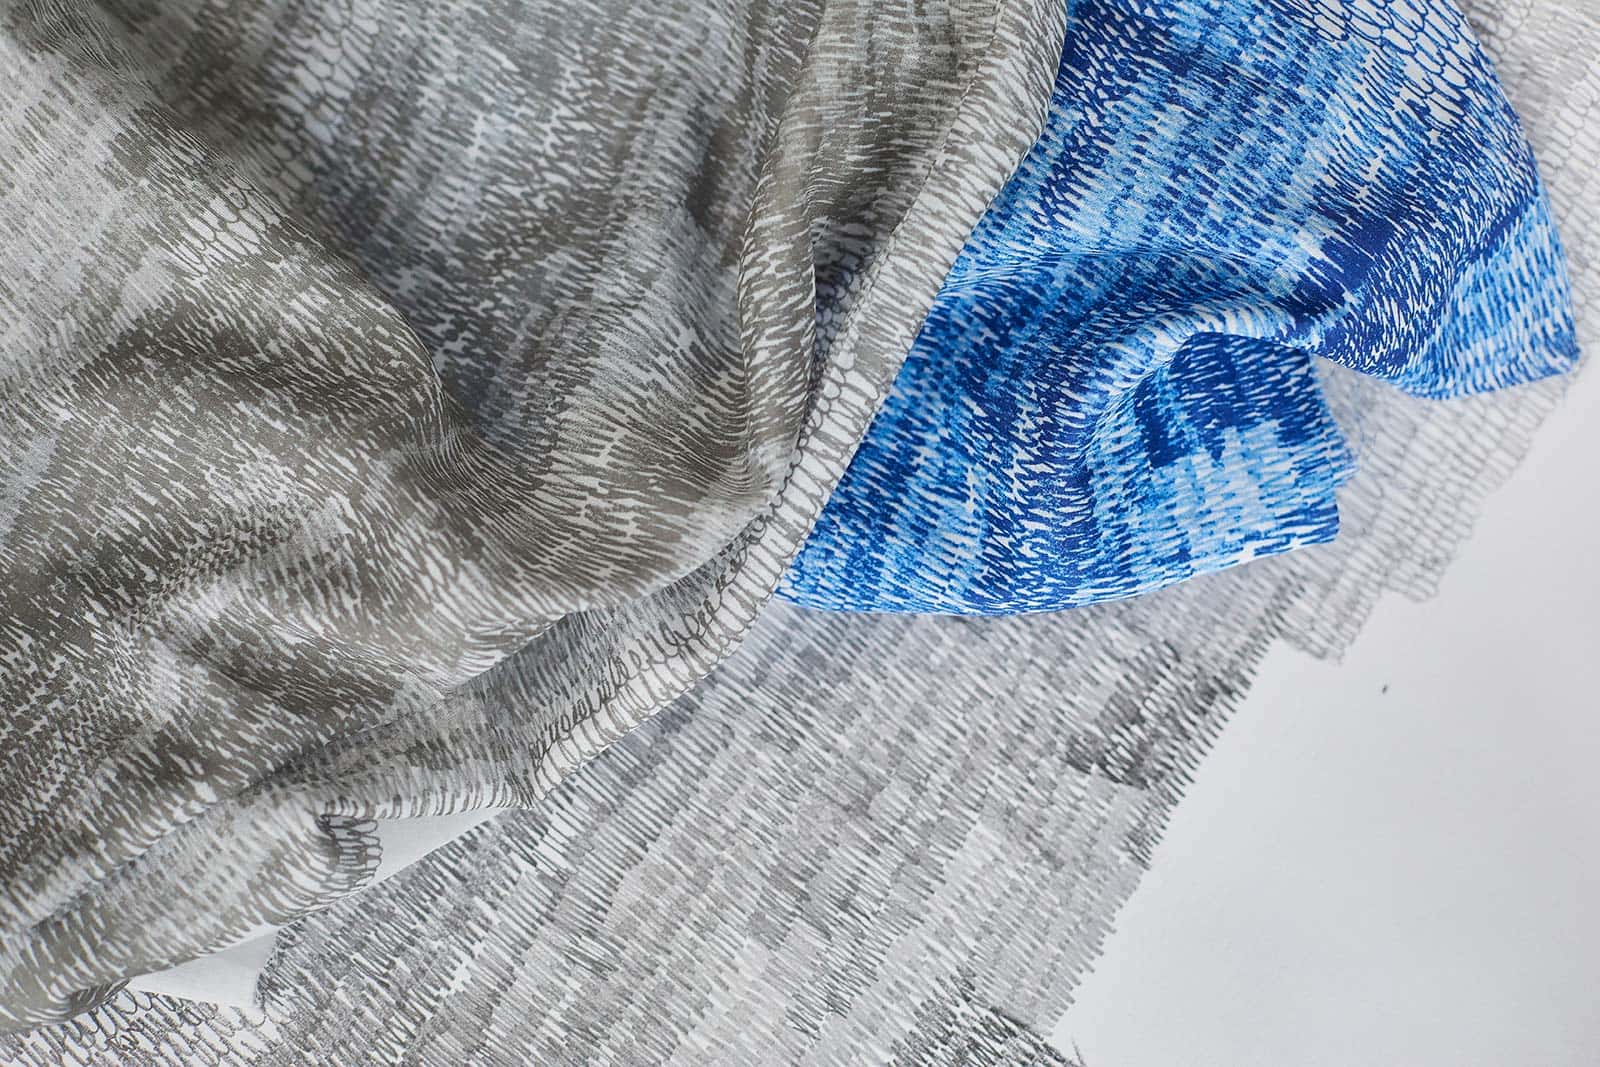 Cloth designs by BA Fashion and BA Textile Design Course Leader Kate Farley - showing blue and grey cloth